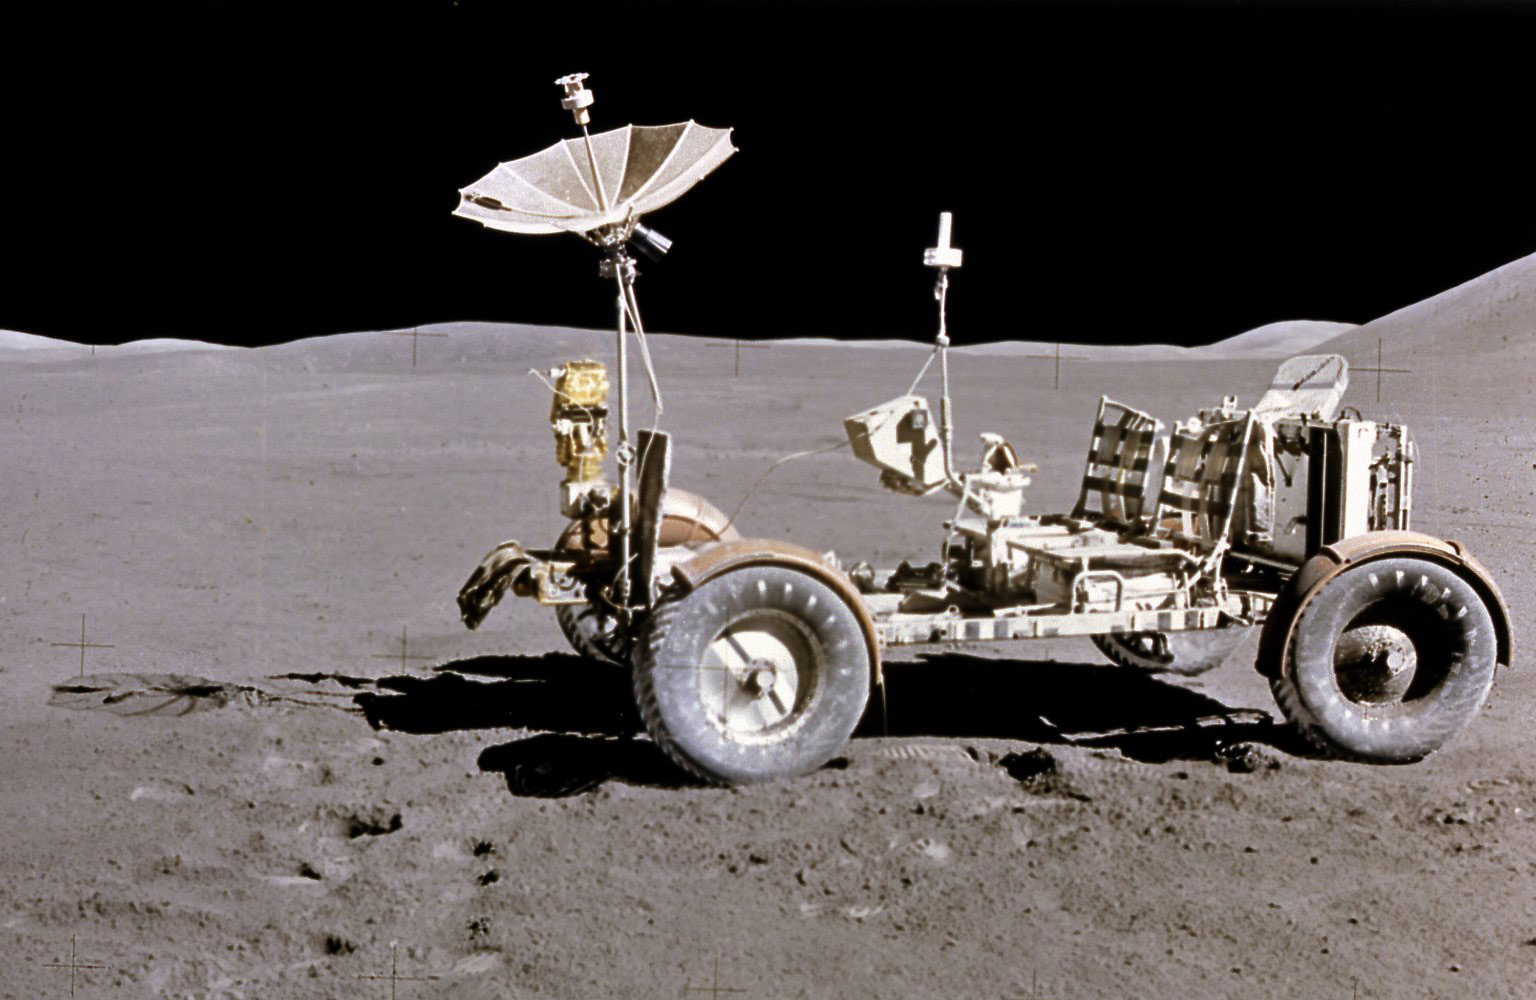 The Lunar Roving Vehicle (LRV) was taken during the Apollo 15 mission. Powered by battery, the lightweight electric car greatly increased the range of mobility and productivity on the scientific traverses for astronauts. It weighed 462 pounds (77 pounds on the Moon). Credit: NASA